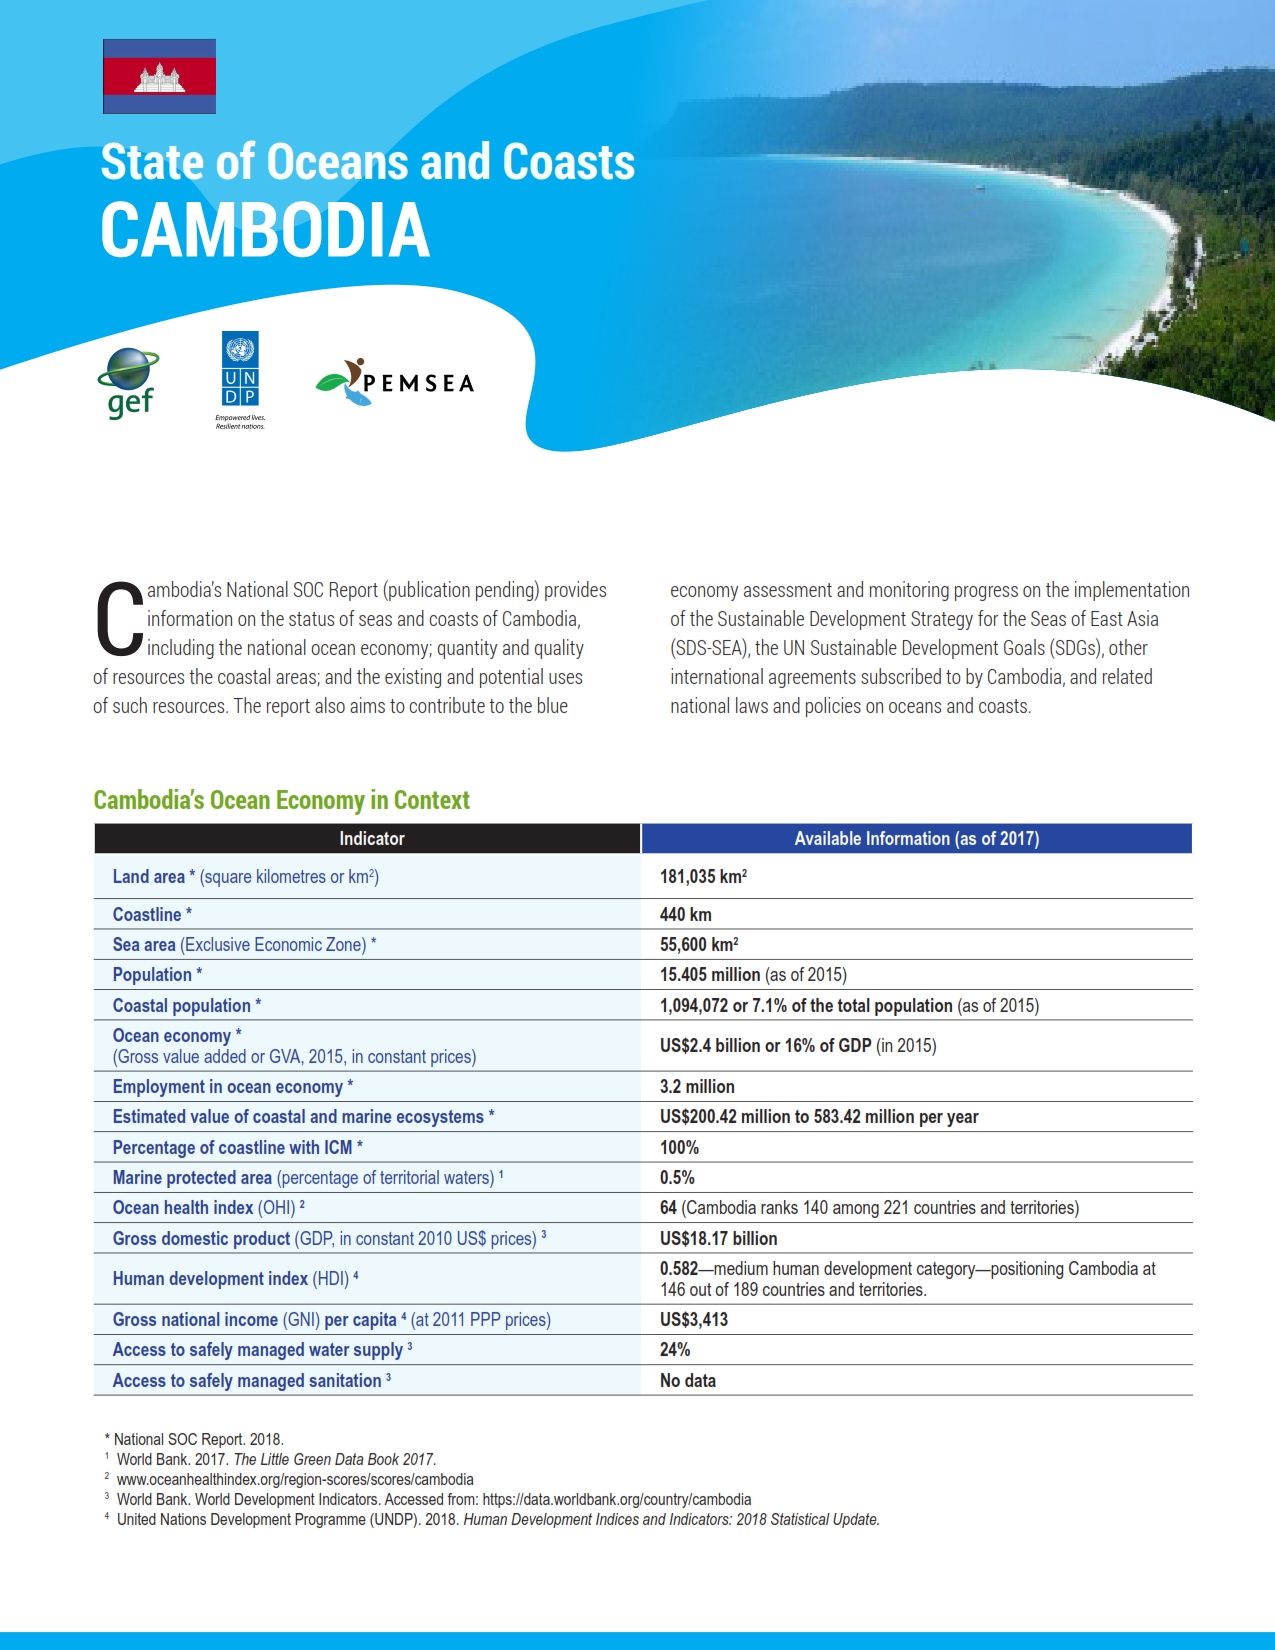 State of Oceans and Coasts of Cambodia